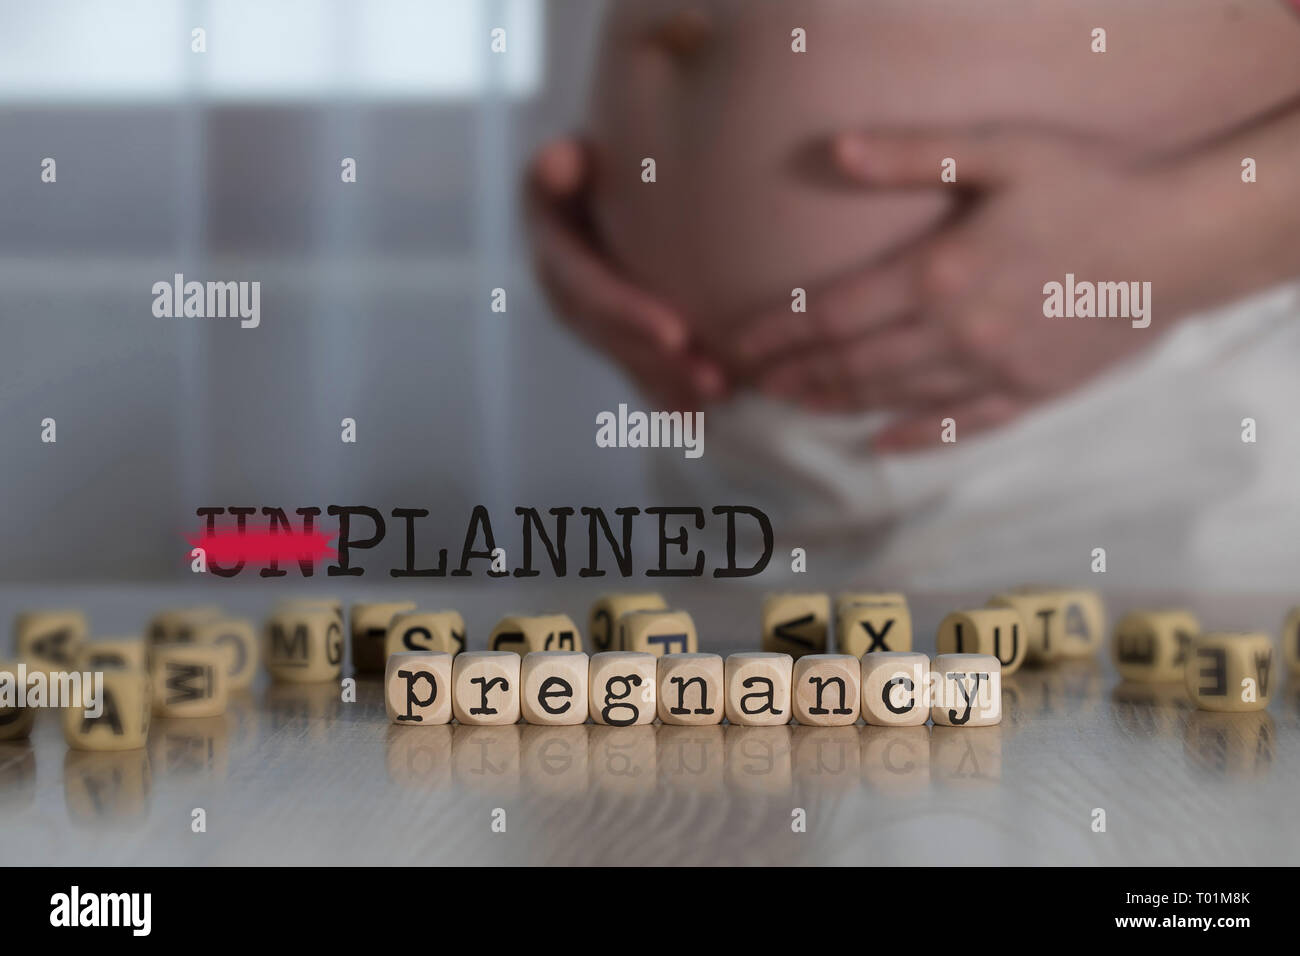 Words UNPLANNED PREGNANCY composed of wooden letters. Pregnant woman in the background Stock Photo